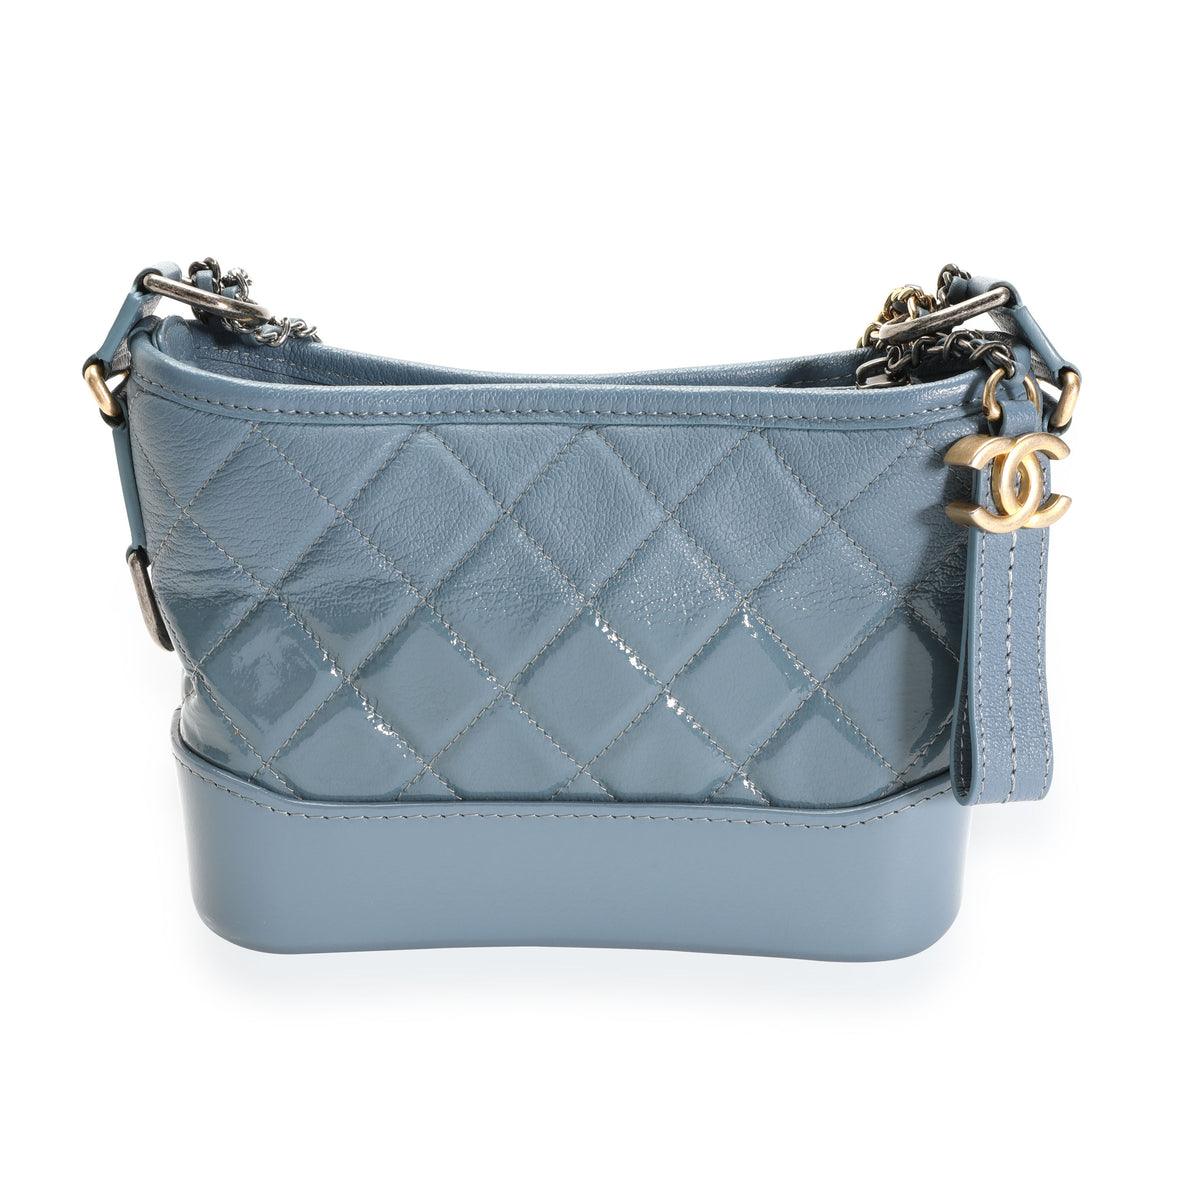 Chanel Blue Ombré Quilted Patent Leather & Aged Calfskin Small Gabrielle Hobo